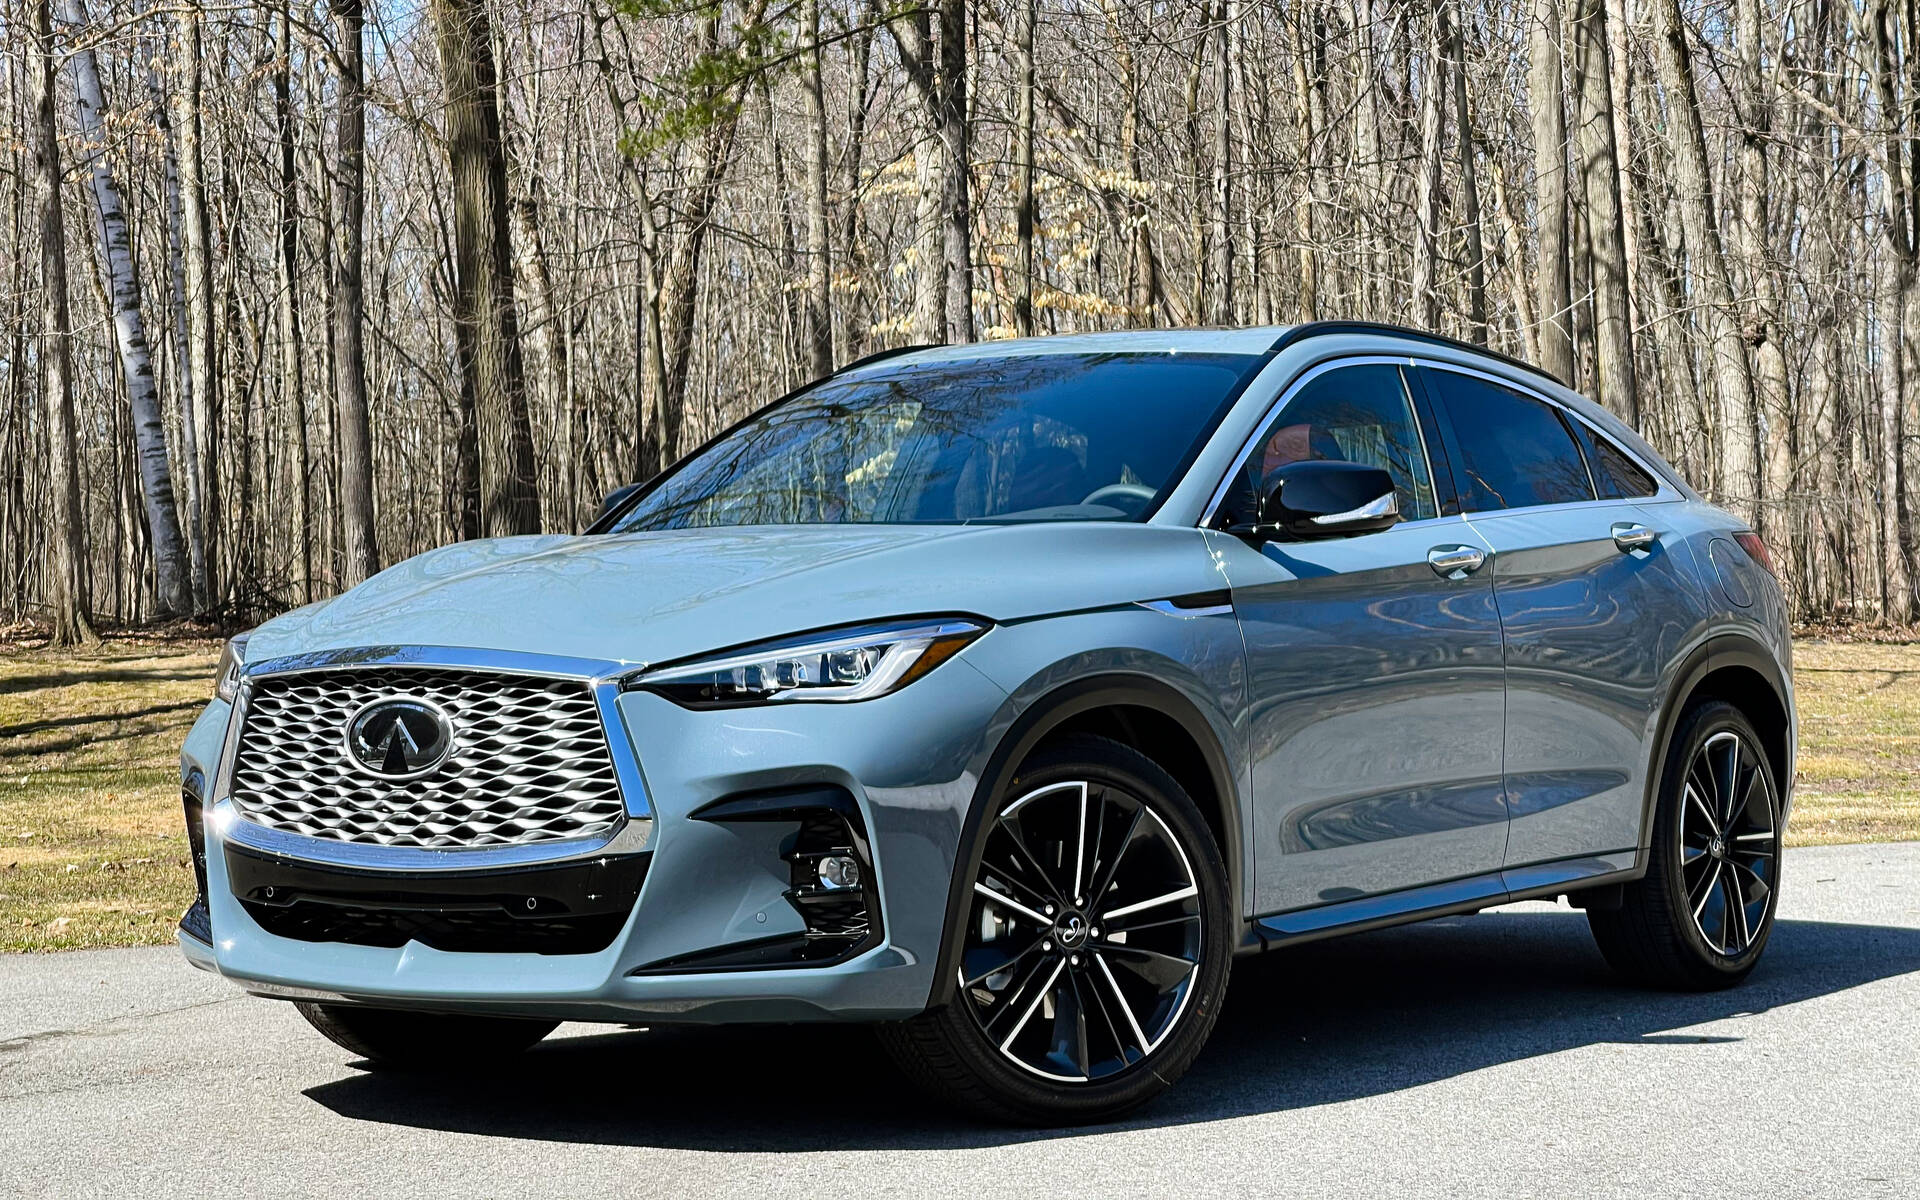 2022 Infiniti QX55: Does it Drive as Good as it Looks ? - The Car Guide